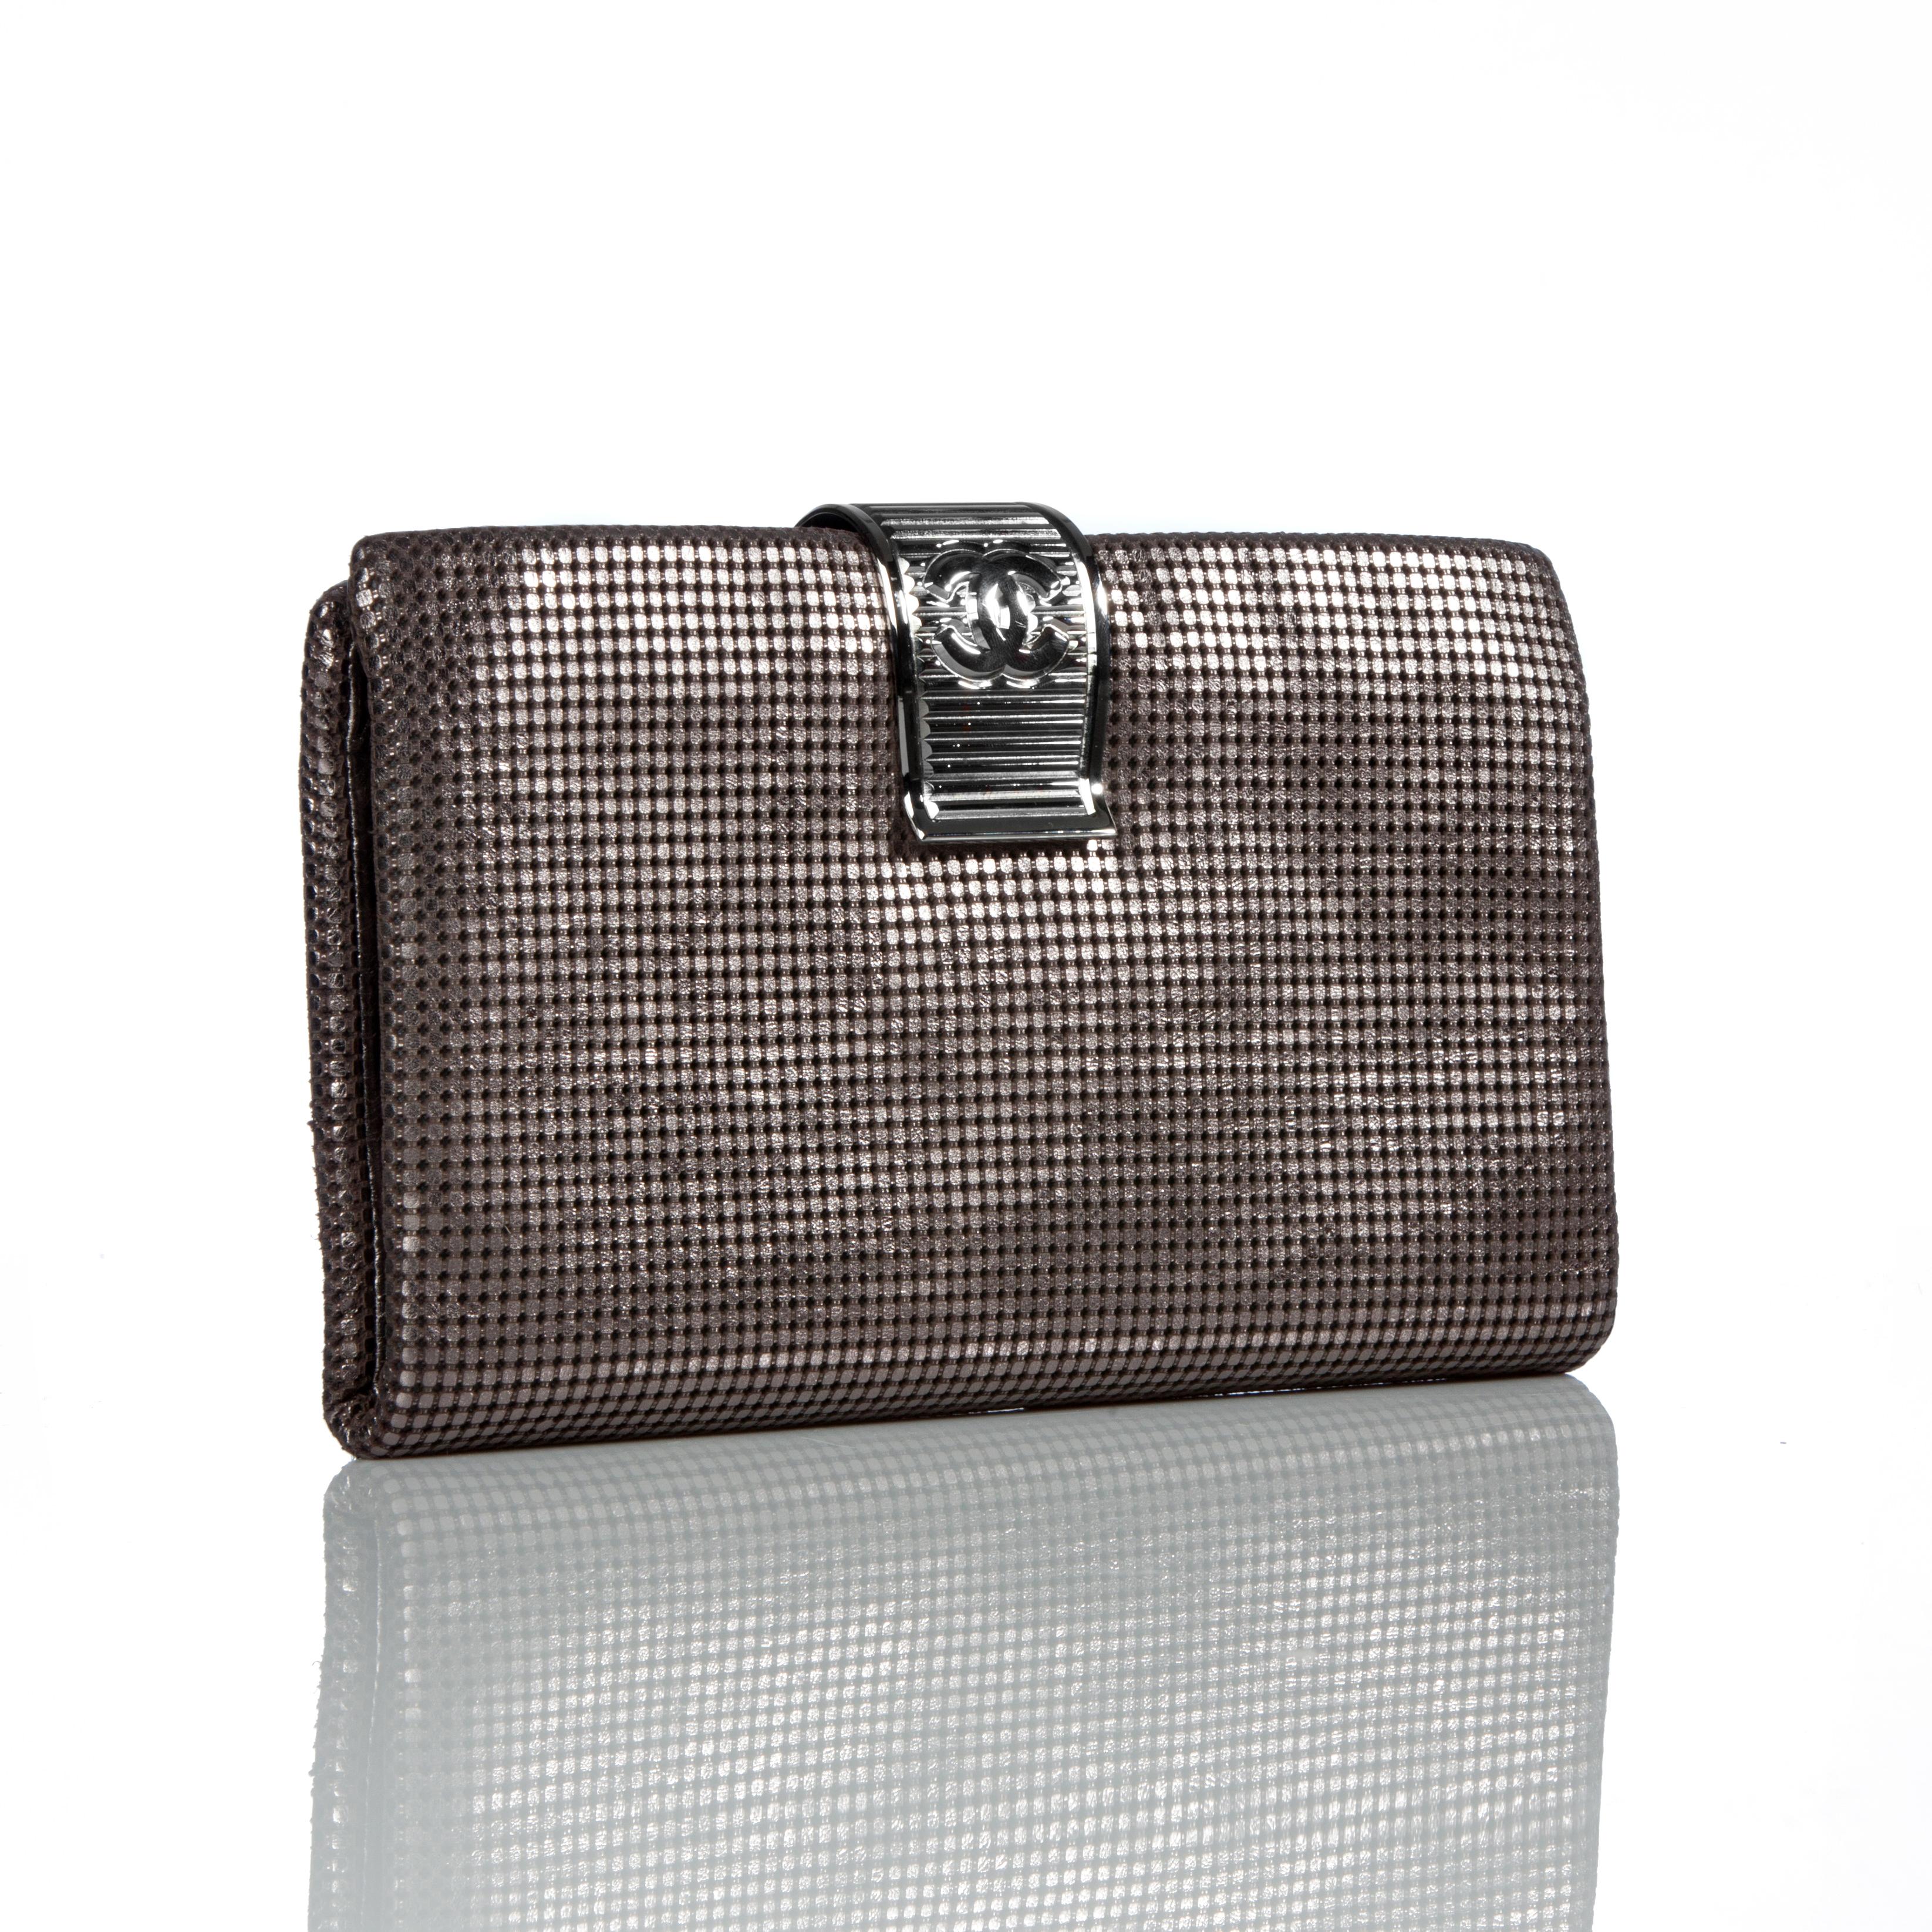 Gray Chanel 2007 Laser Etched Chainmail Metallic Clutch Evening Gala Bag For Sale